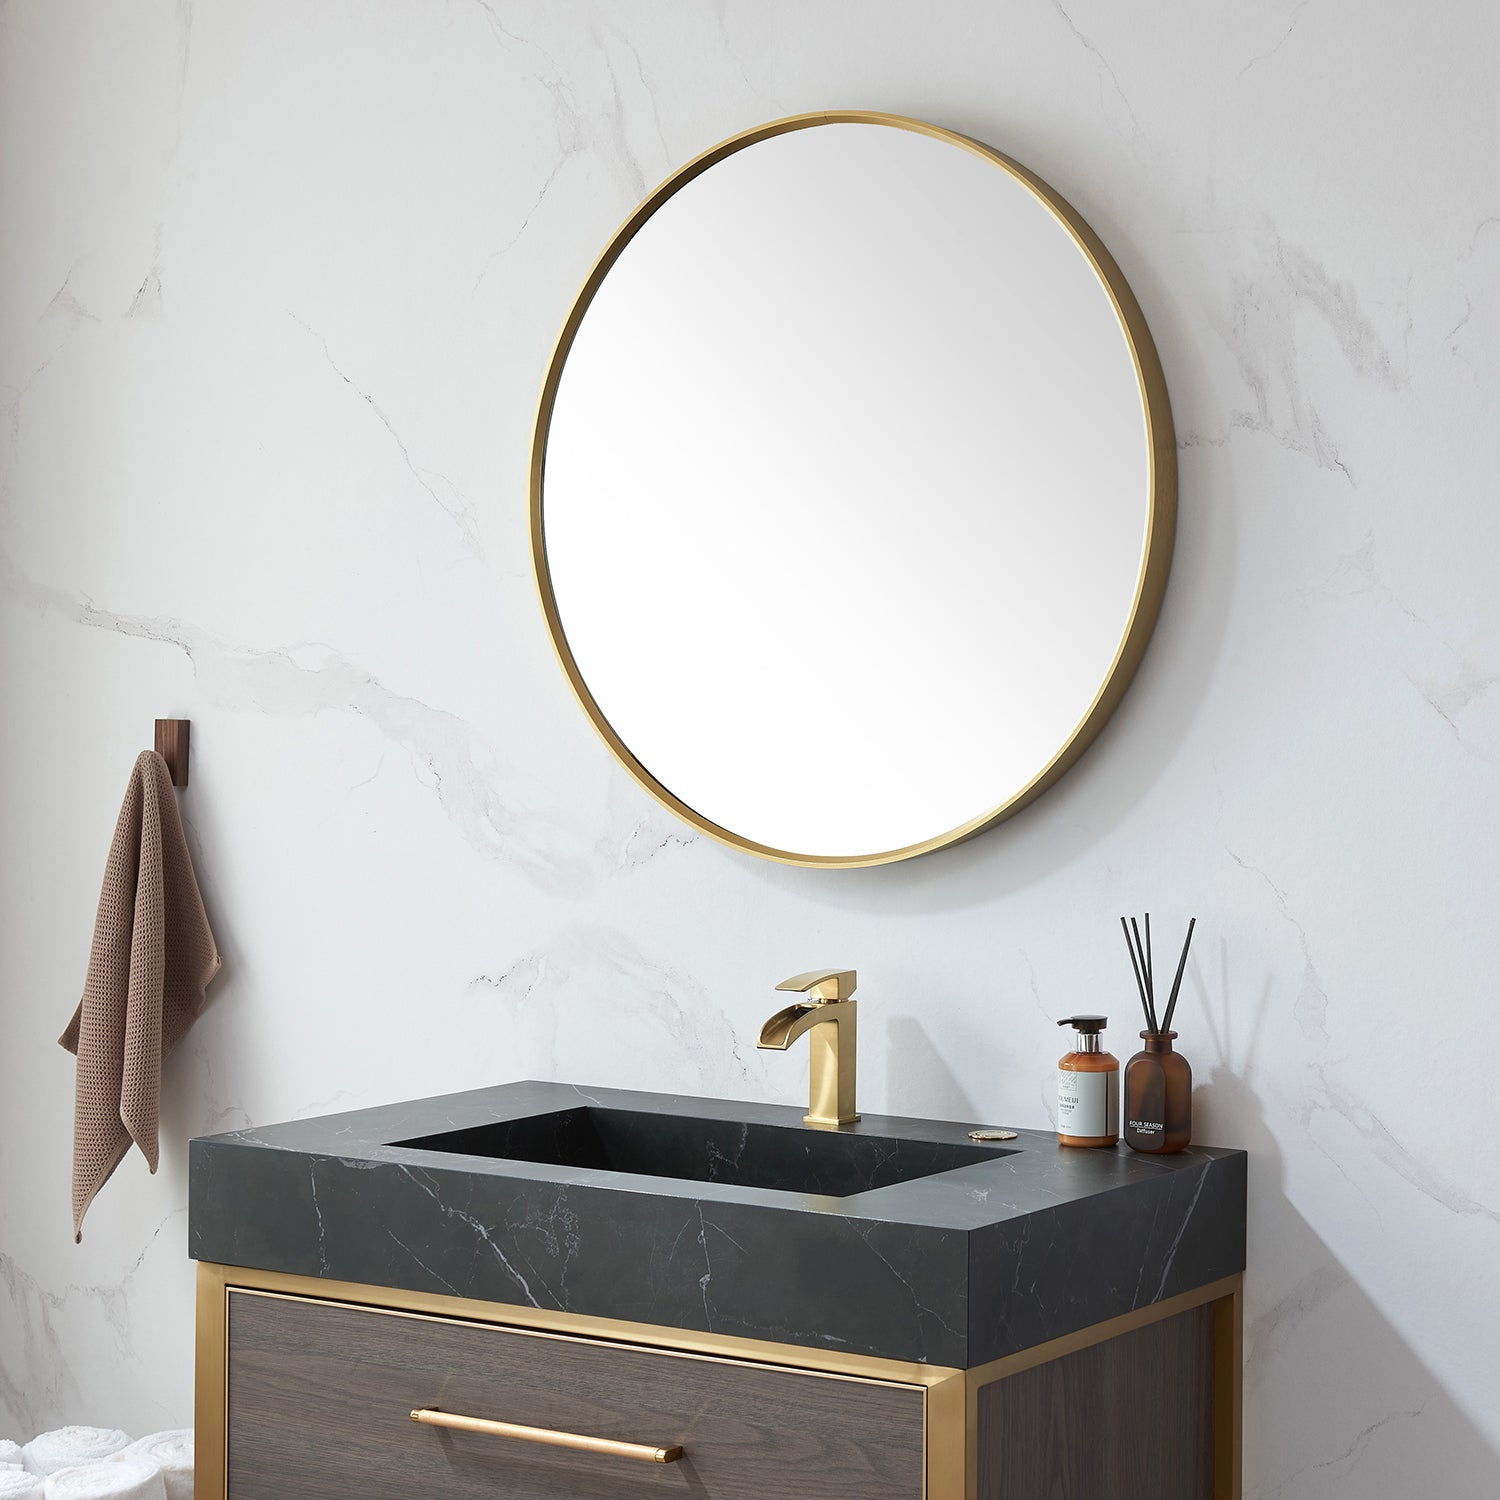 Cascante 32 in. W x 32 in. H Round Metal Wall Mirror in Brushed Gold